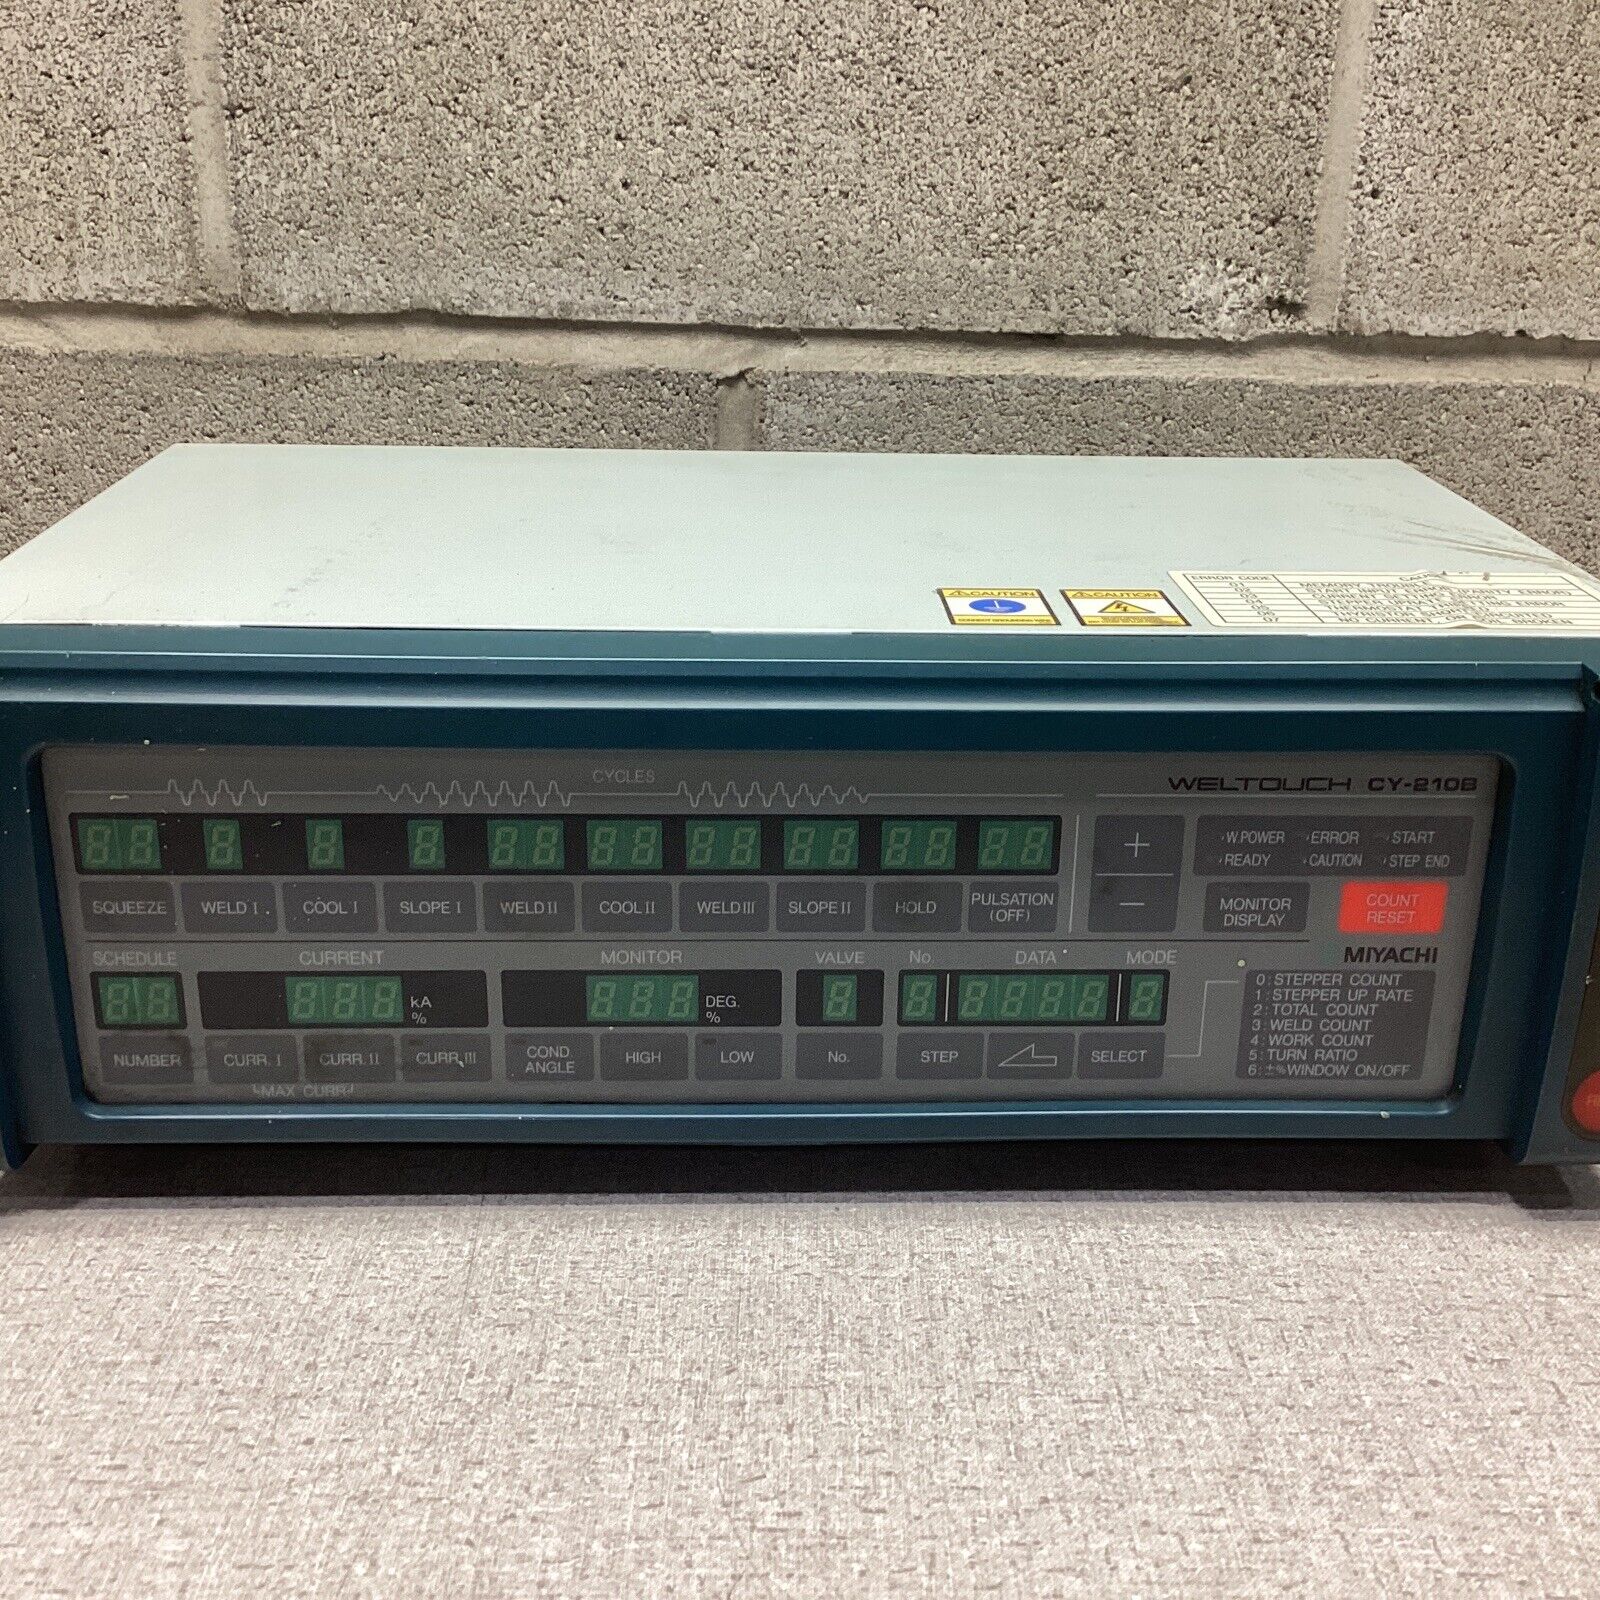 Miyachi Weltouch Cy-210b Constant Welding Controller Cy-210b-00-01 #3456fmlh32